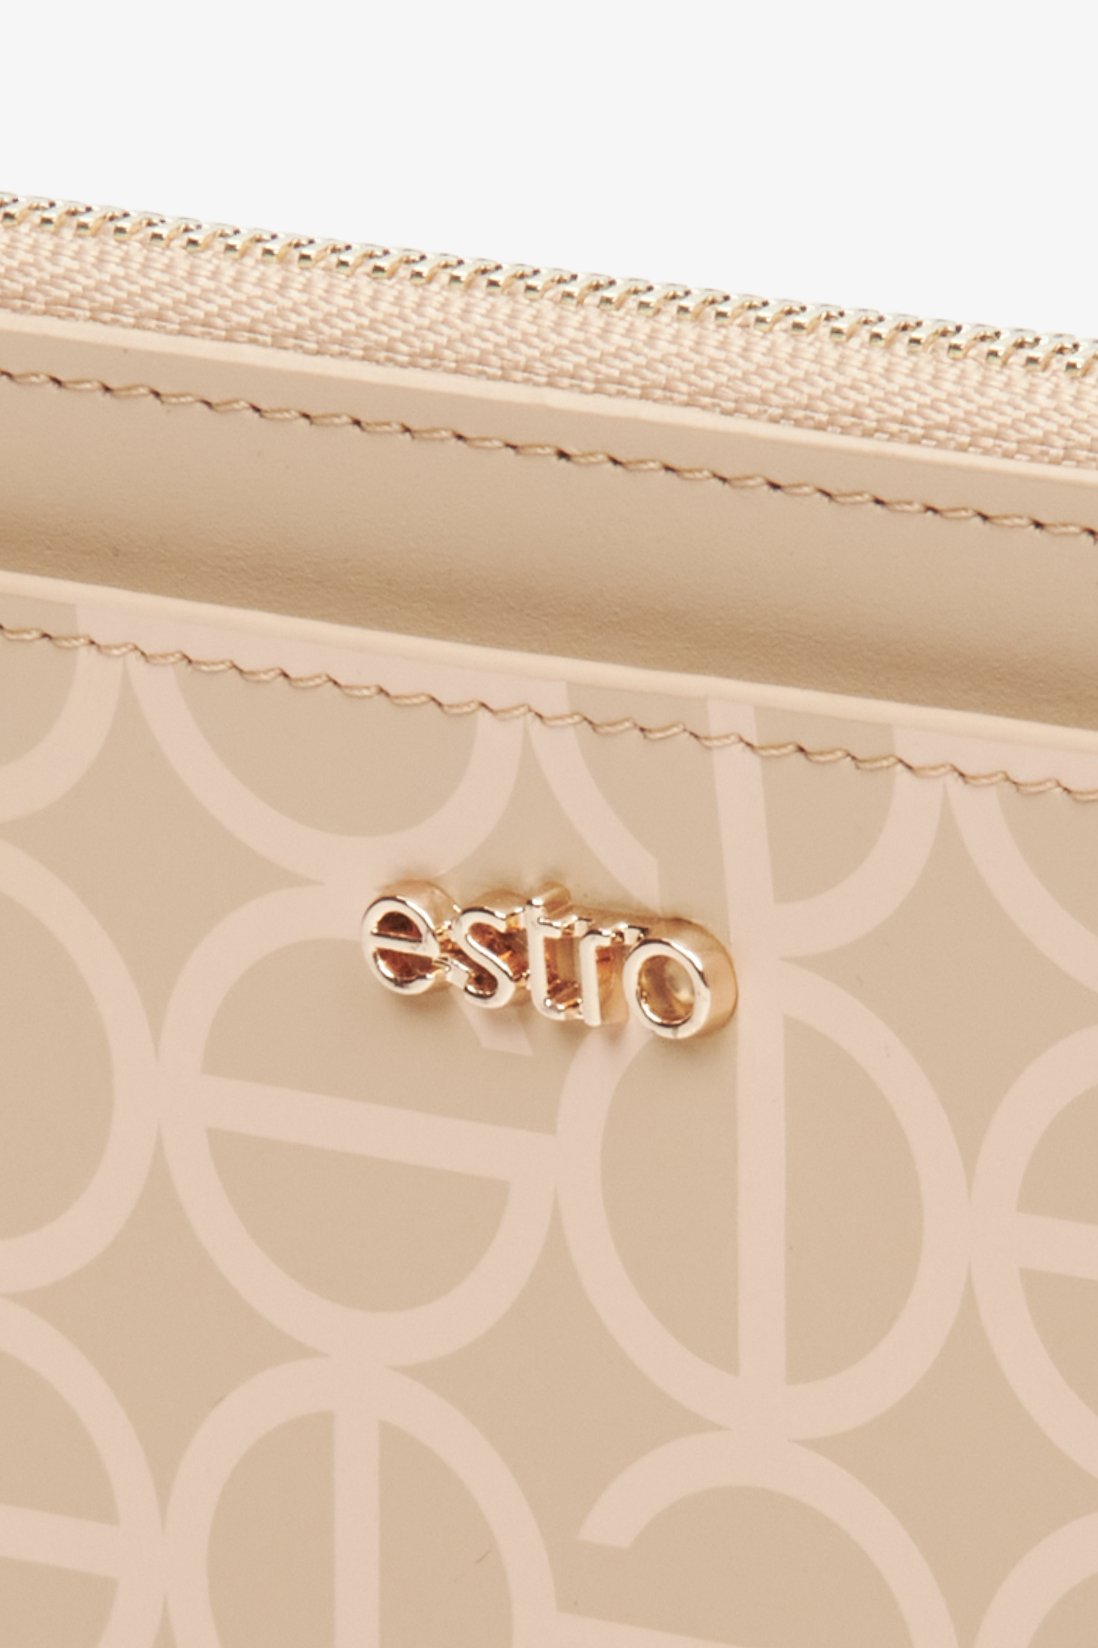 Women's, large beige wristlet made of genuine leather by Estro - close-up on the details.